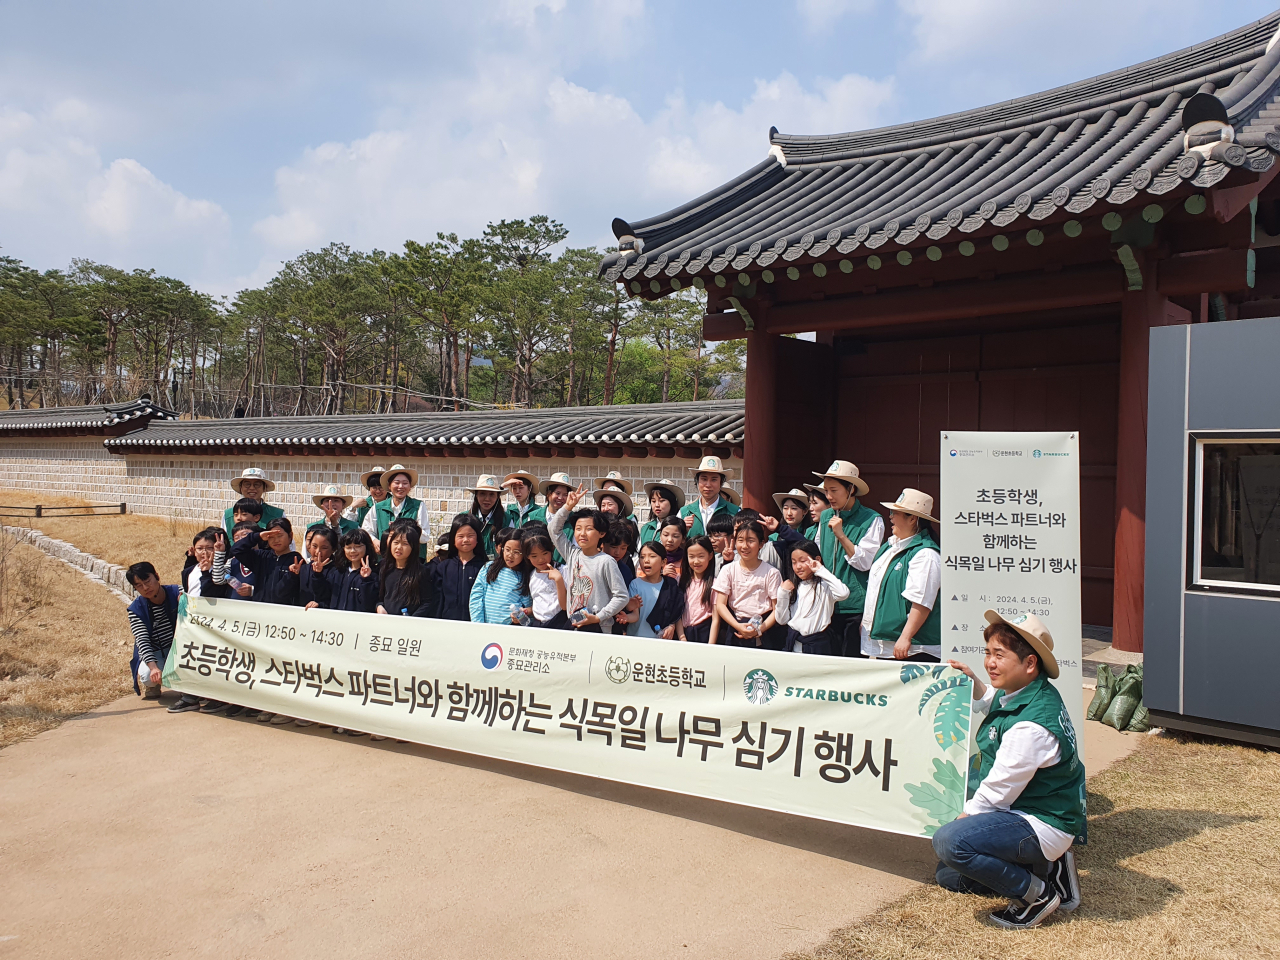 Elementary school students take part in tree planting at Jongmyo in Seoul on Friday. (CHA)